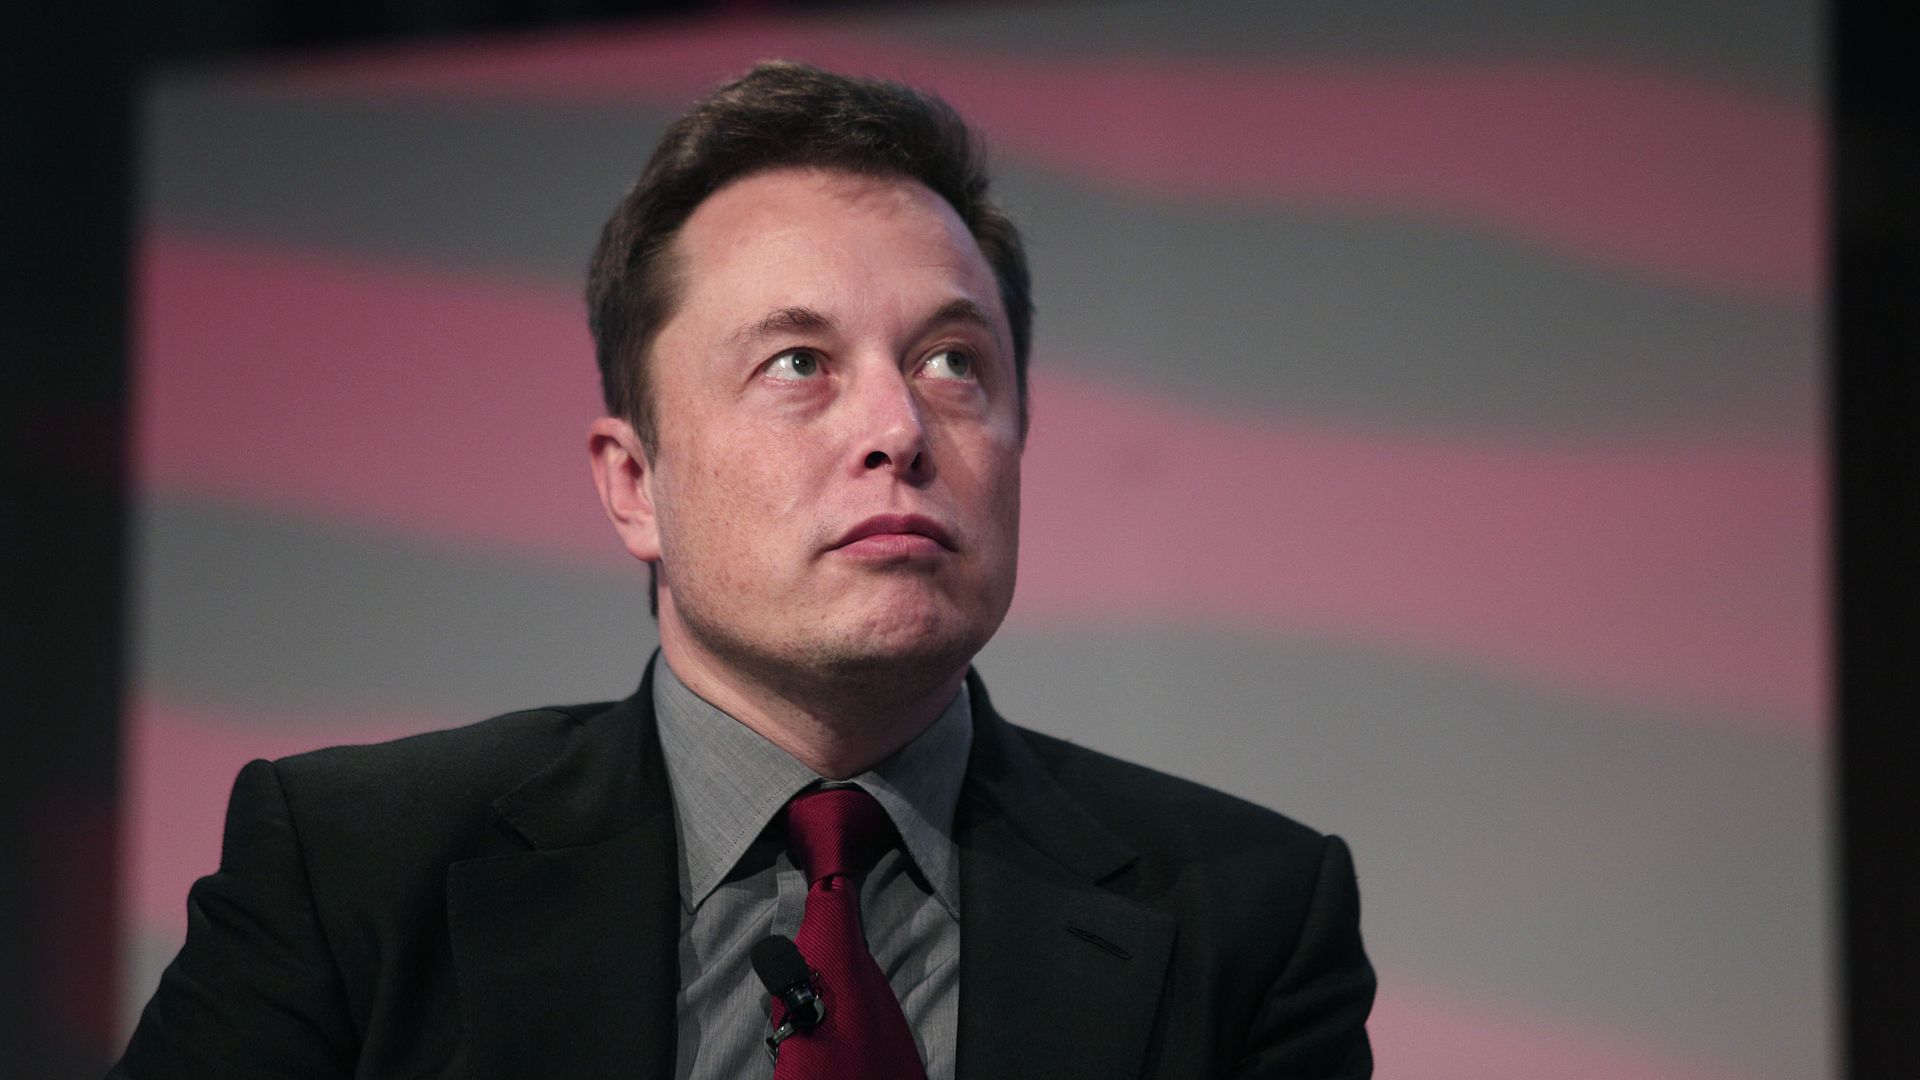 Elon Musk, co-founder and CEO of Tesla Motors, speaks at the 2015 Automotive News World Congress January 13, 2015 in Detroit, Michigan